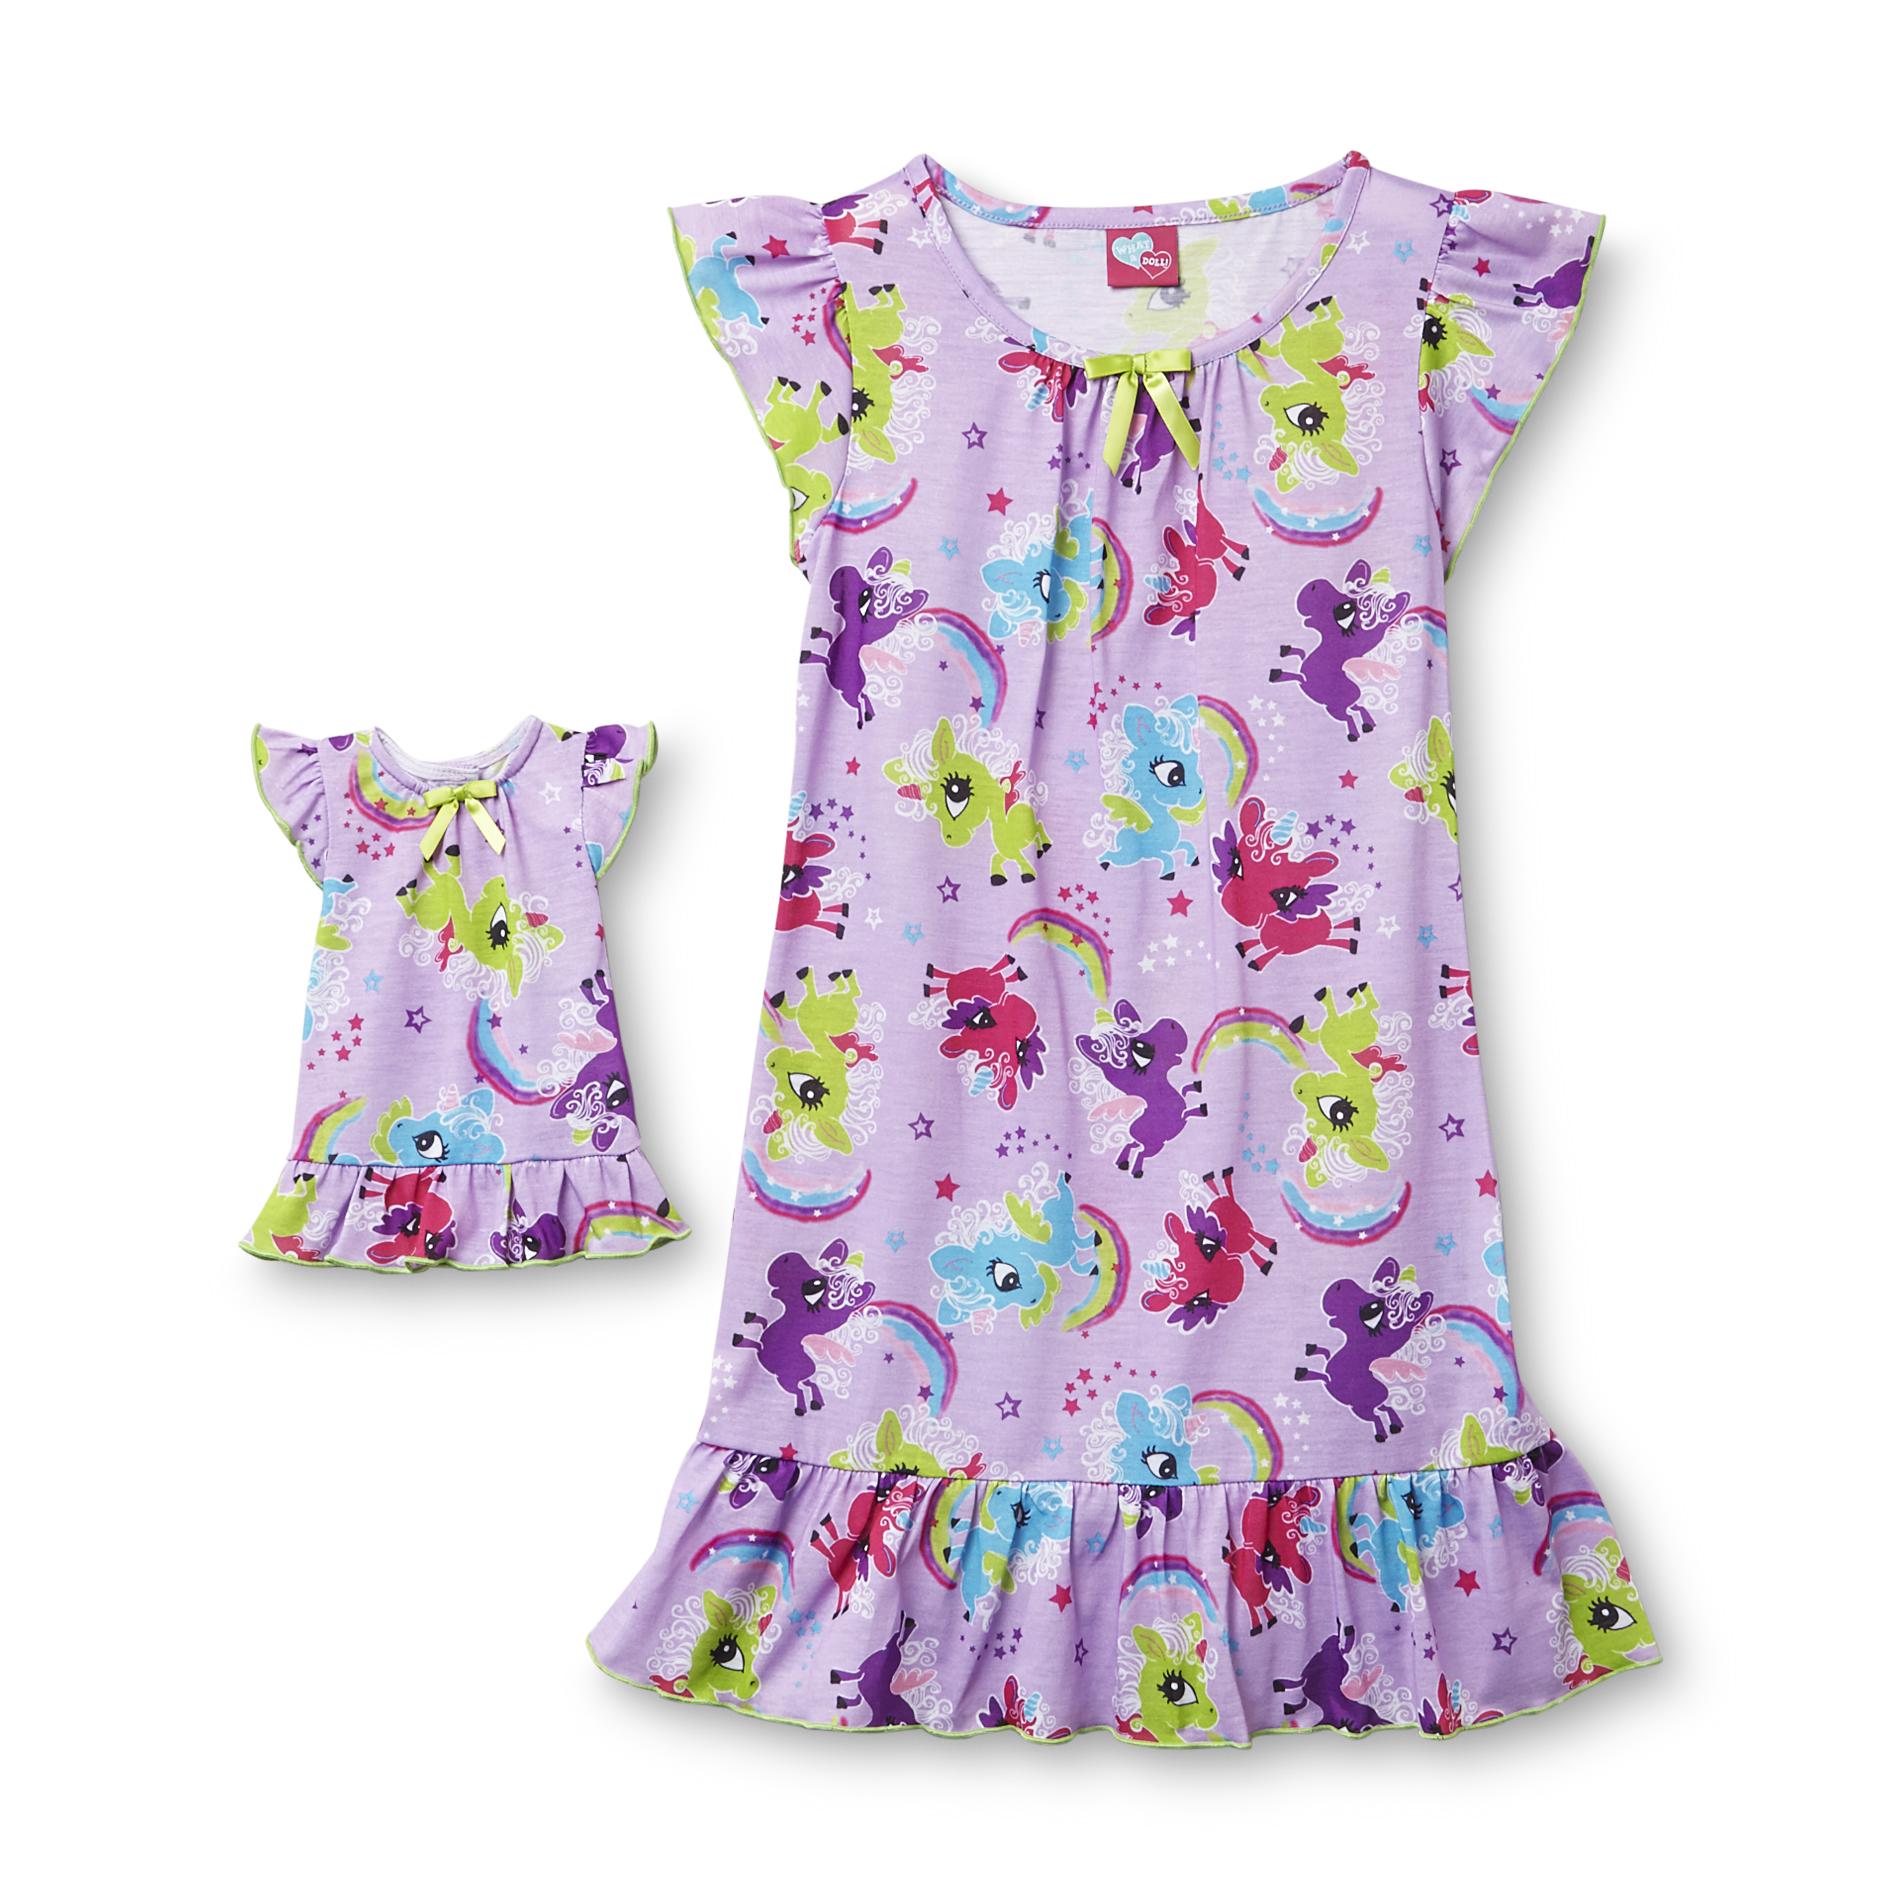 What A Doll Girl's Nightgown & Doll Outfit - Unicorns & Rainbows